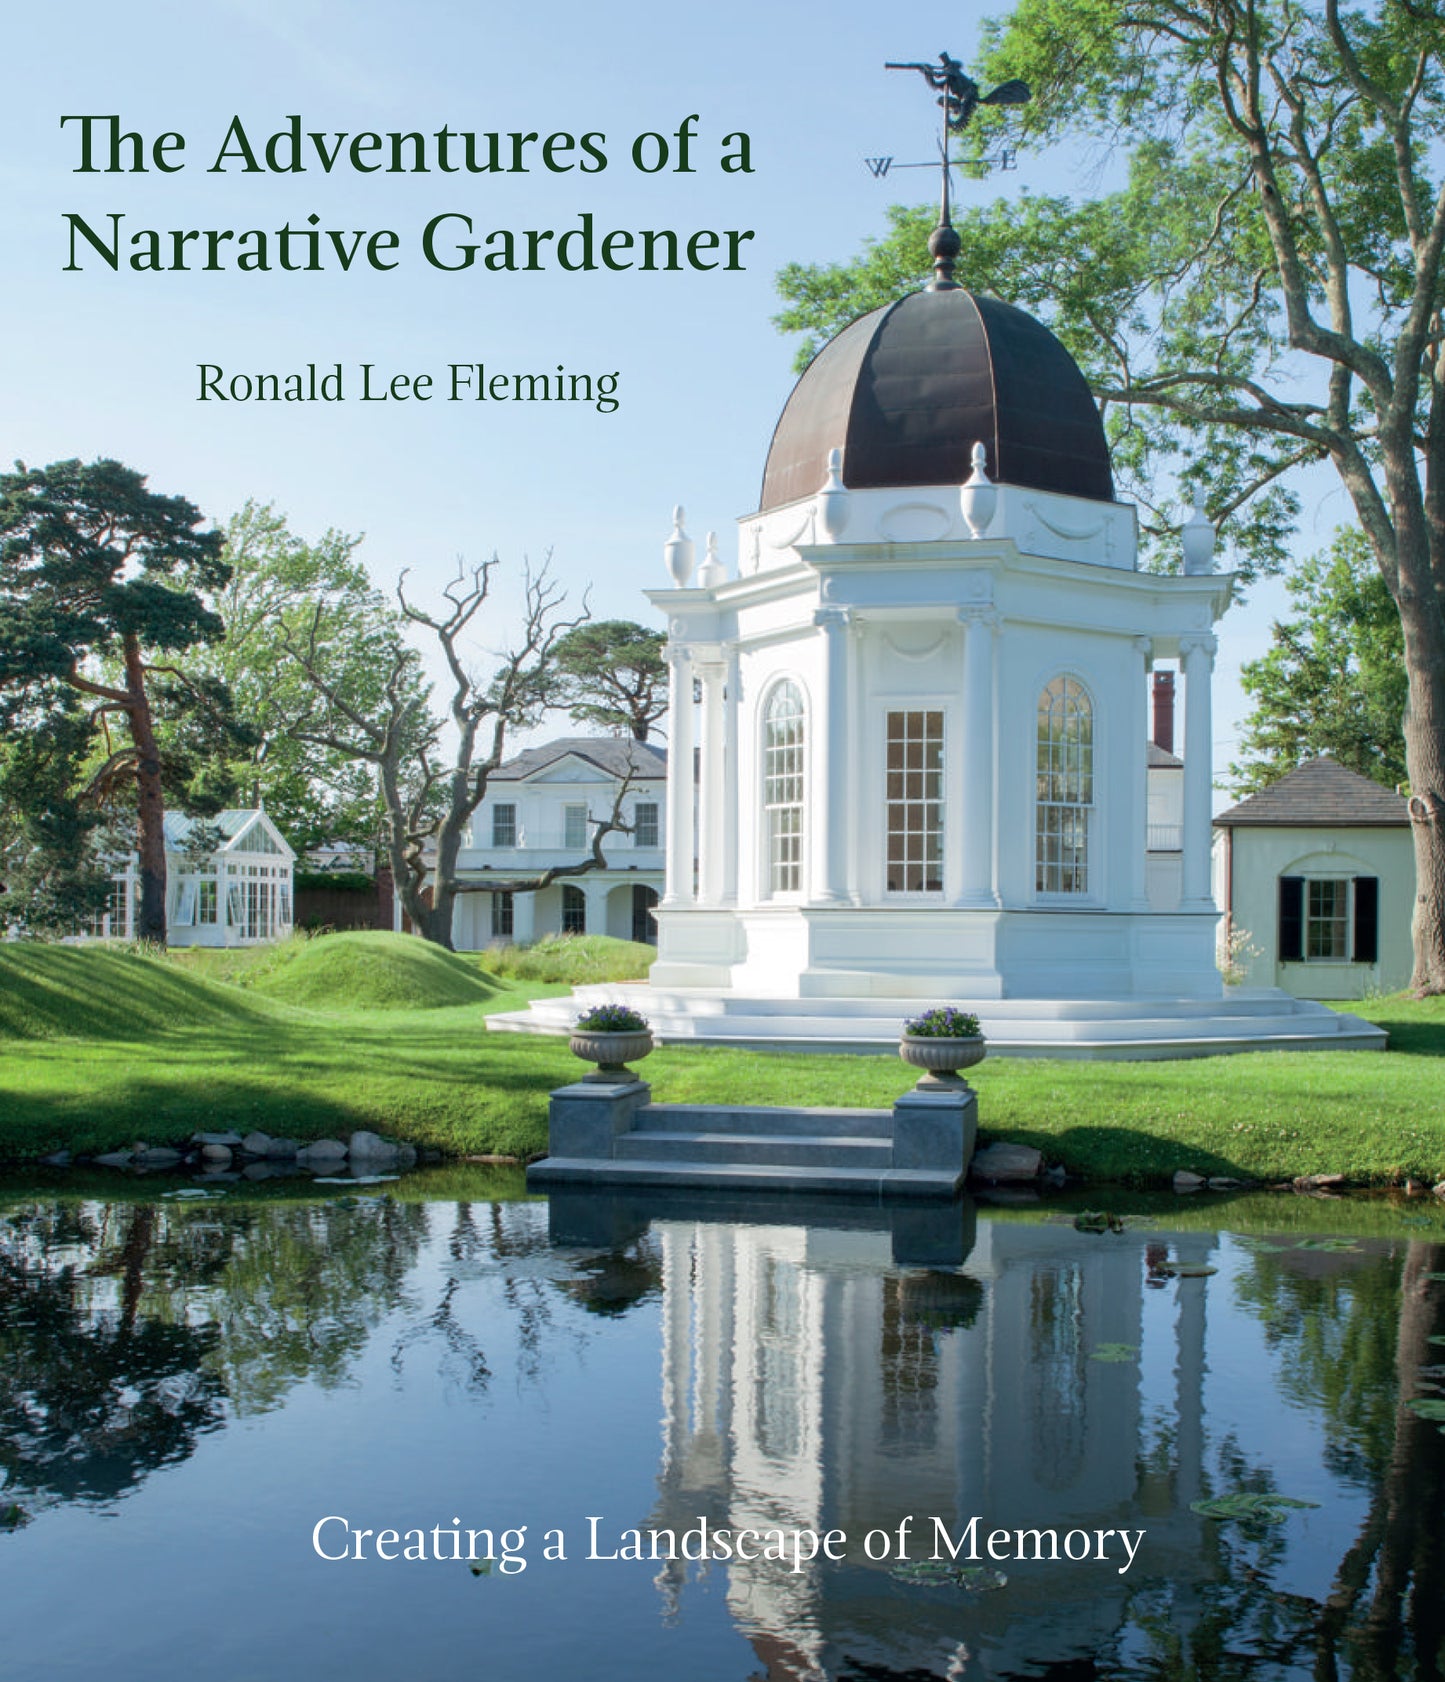 Garden book by Ronald Lee Fleming - "...a fascinating book for many reasons..." - John Kerry